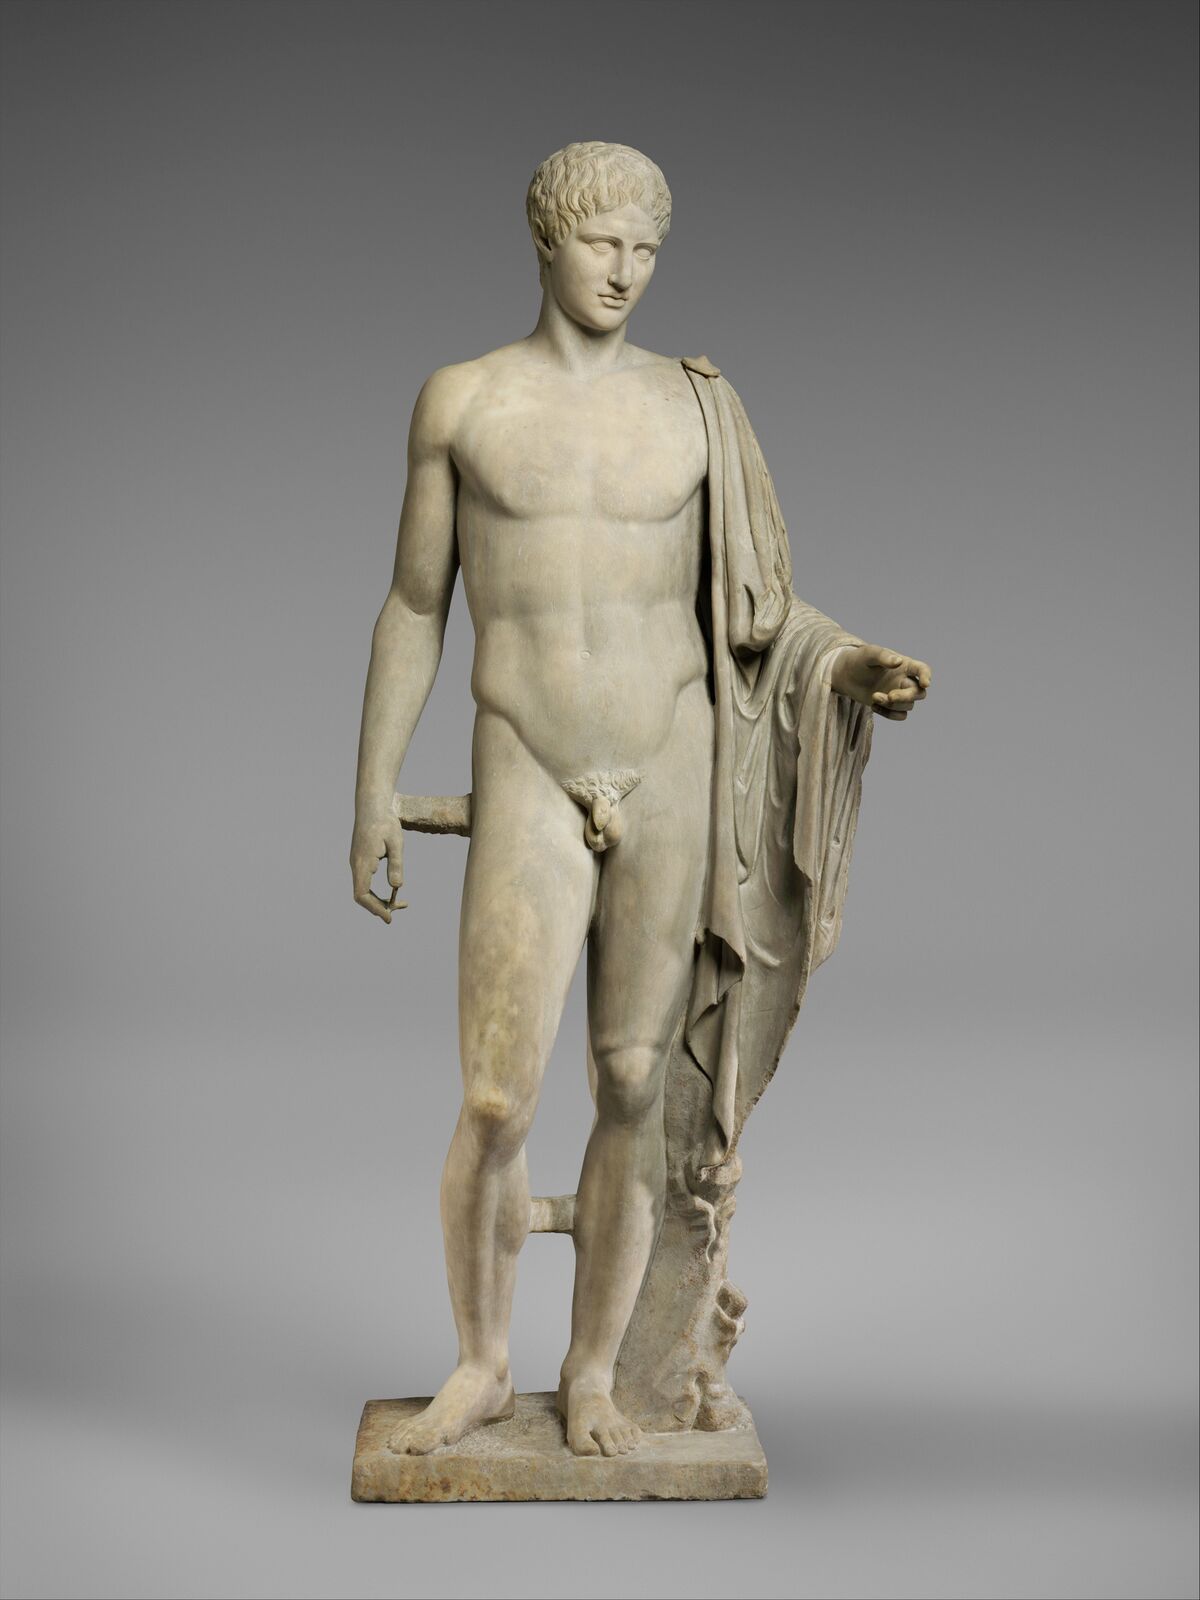 Copy of work attributed to Polykleitos, 1st or 2nd century A.D., via the Metropolitan Museum of Art.